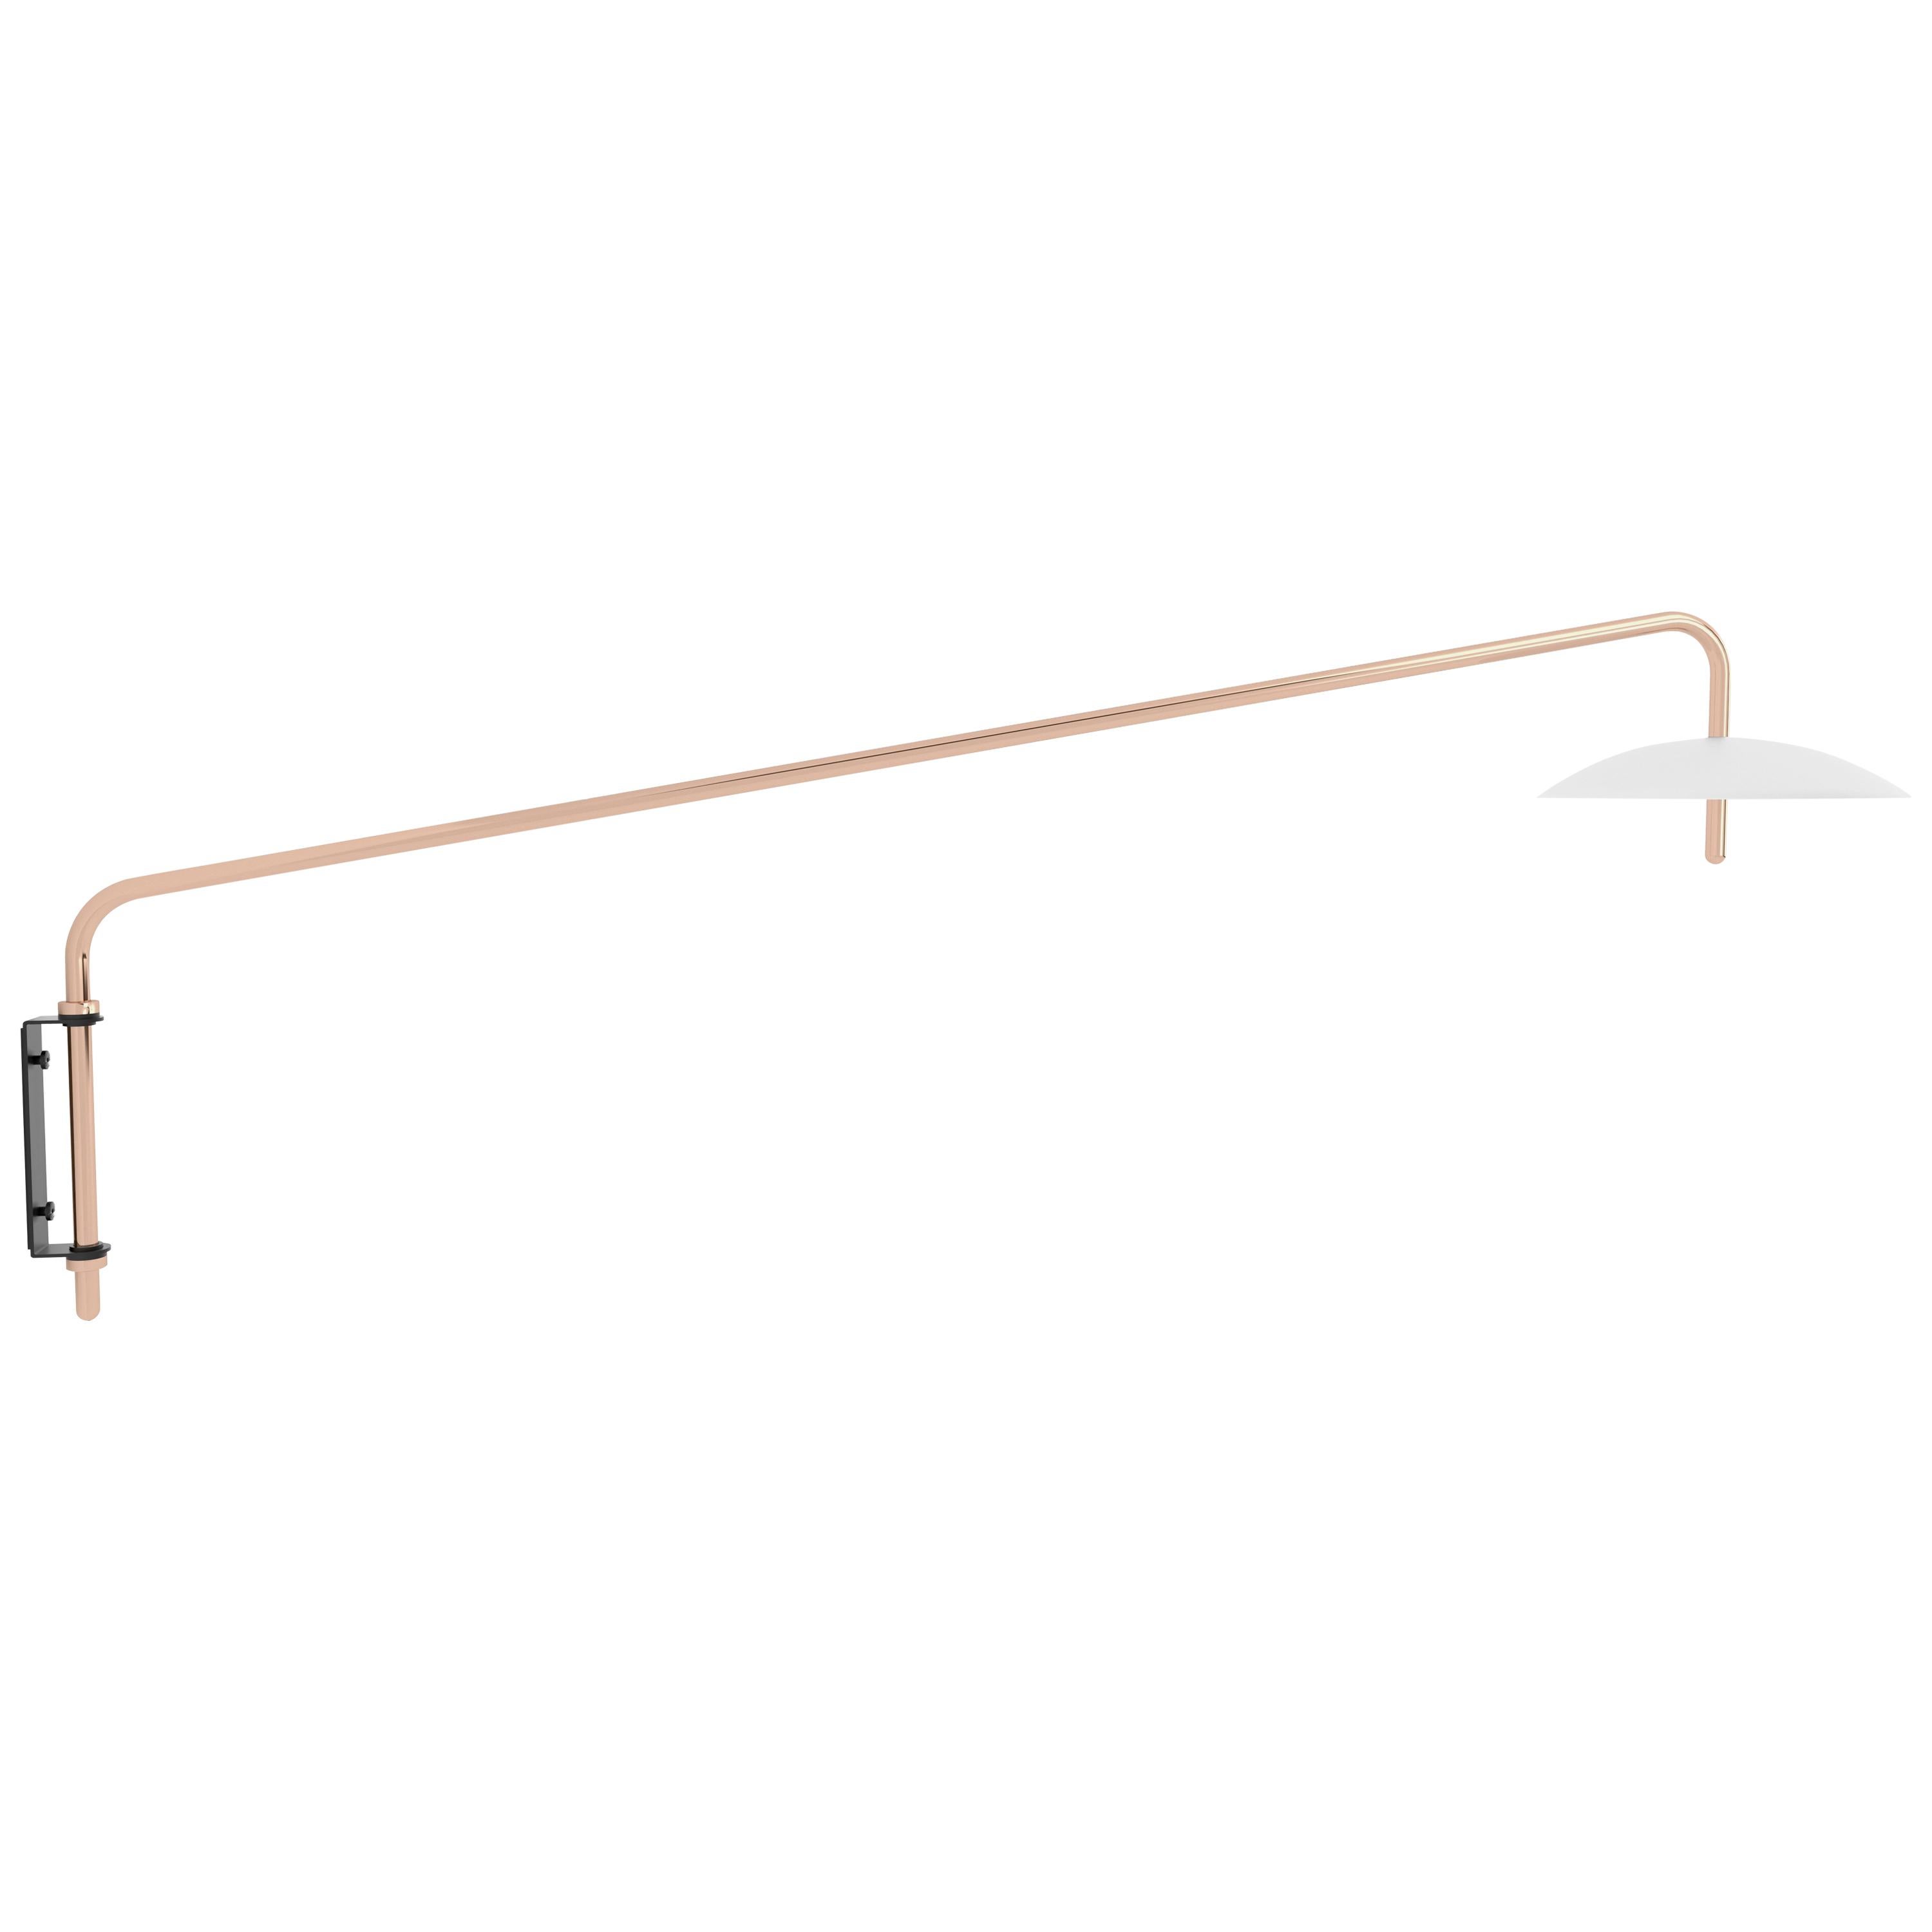 Signal Arm Sconce in White X Copper, Long, by Souda, Made to Order